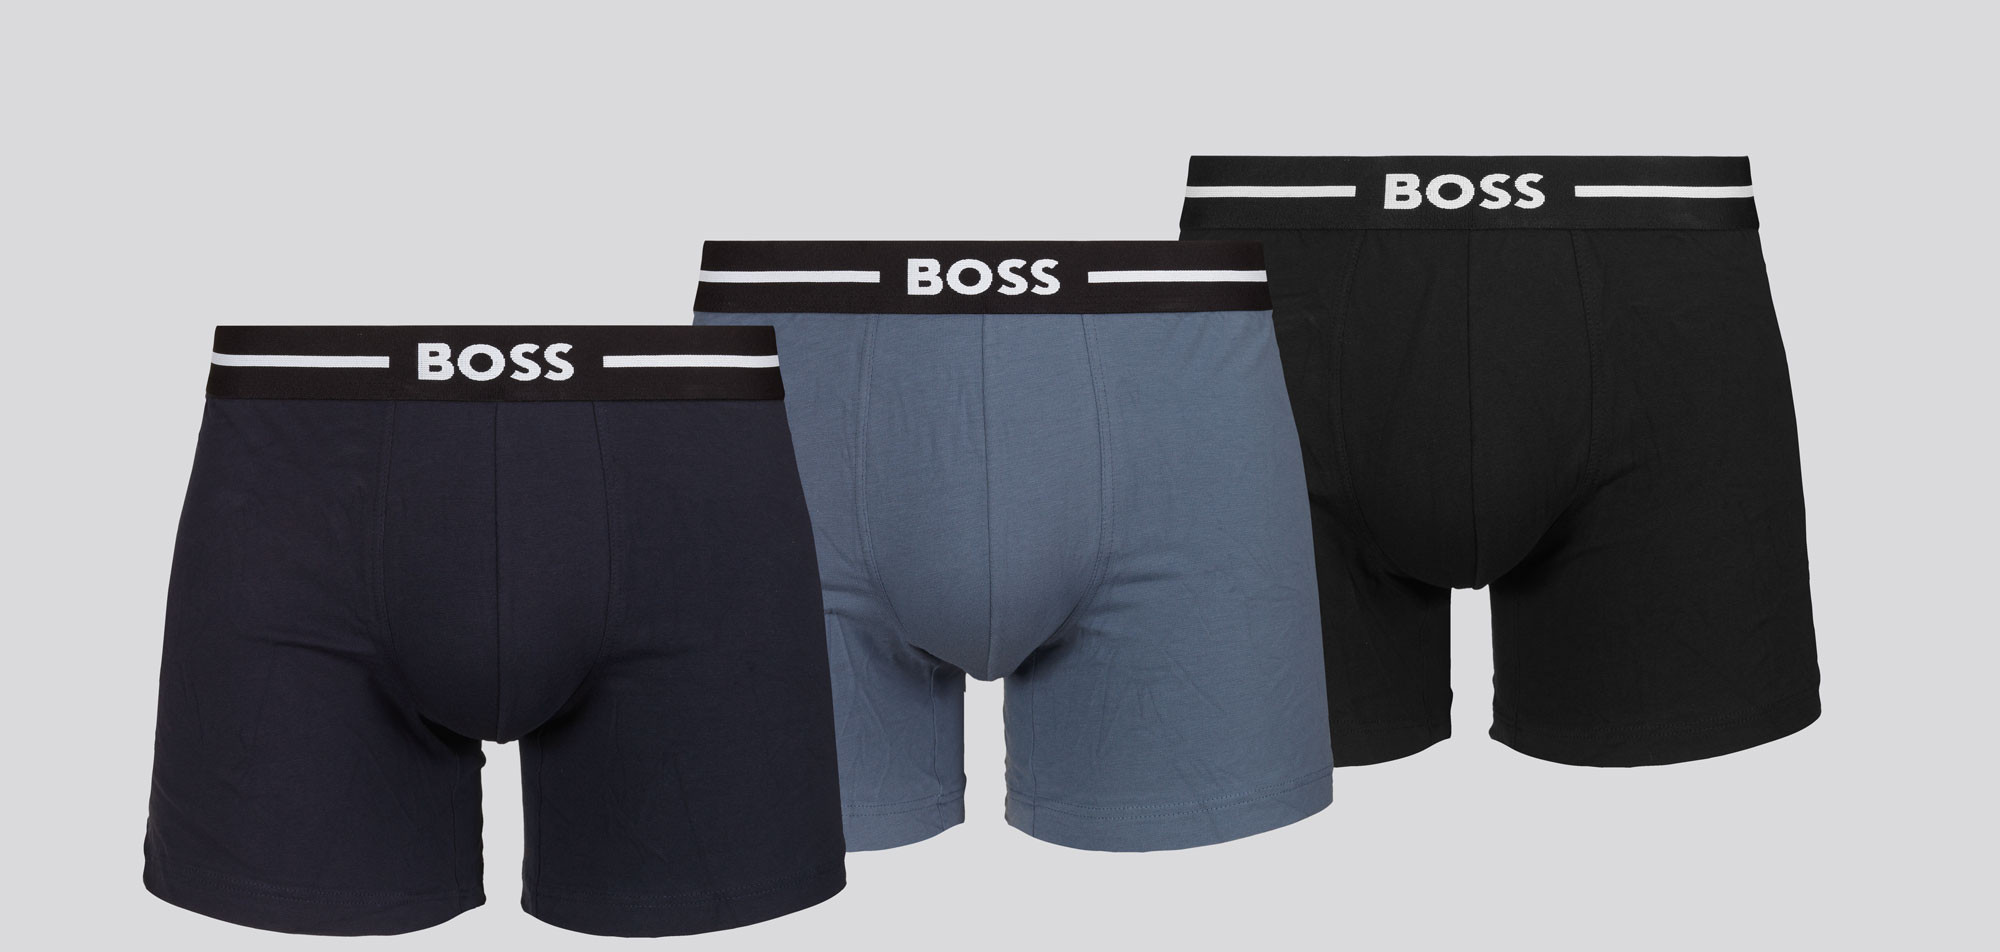 Boss Boxer Brief 3-Pack 621 Bold, color Nee